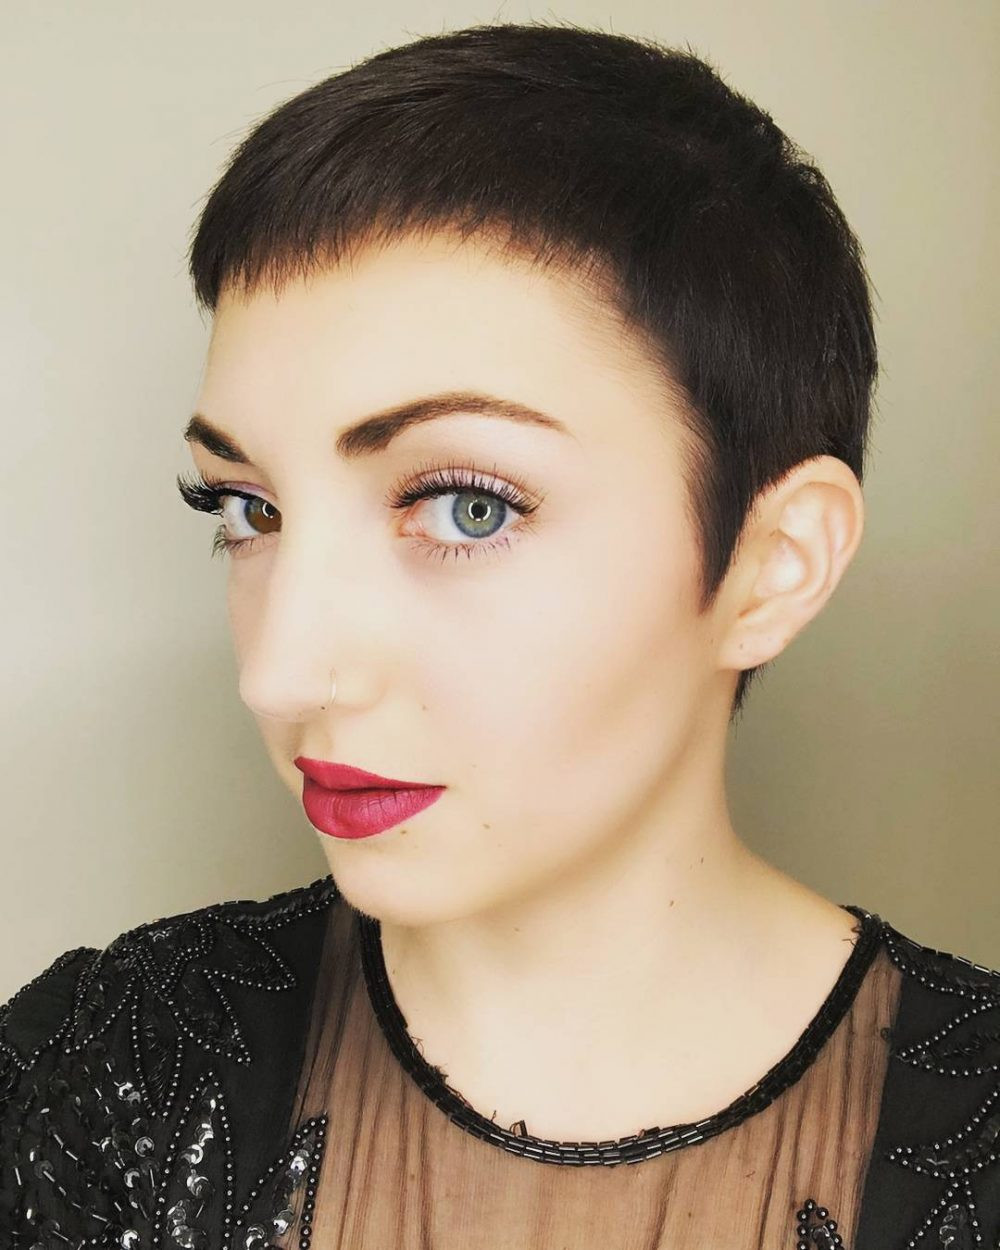 Super Short Haircuts For Women
 30 Very Short Haircuts You Have to See in 2020